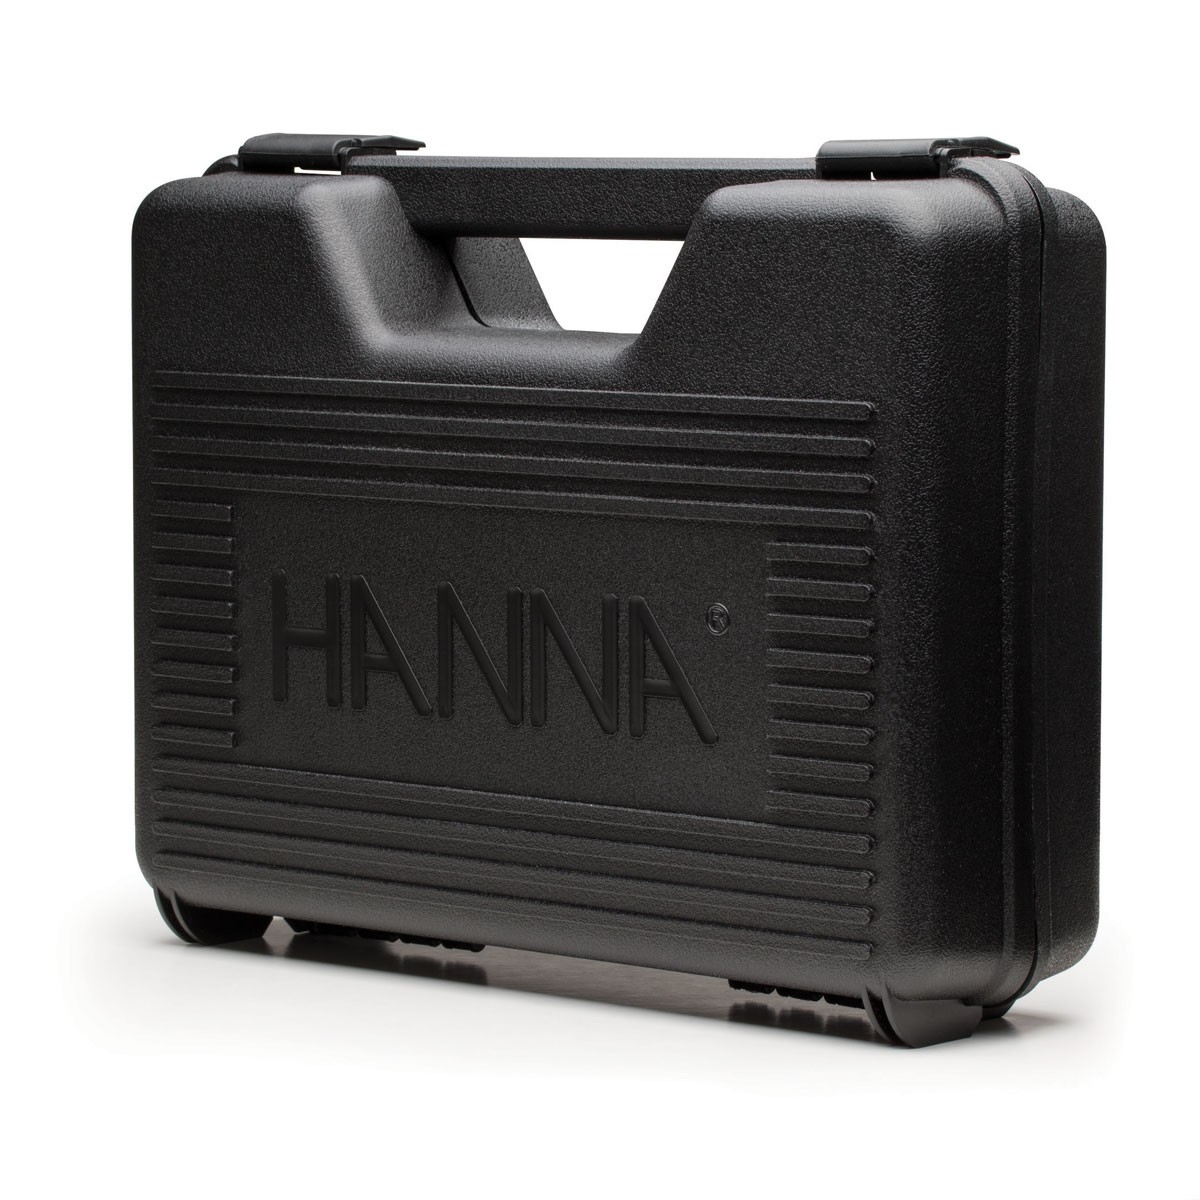 Hanna Instruments HI99161 Ph Meter in Case With Solutions for sale online 